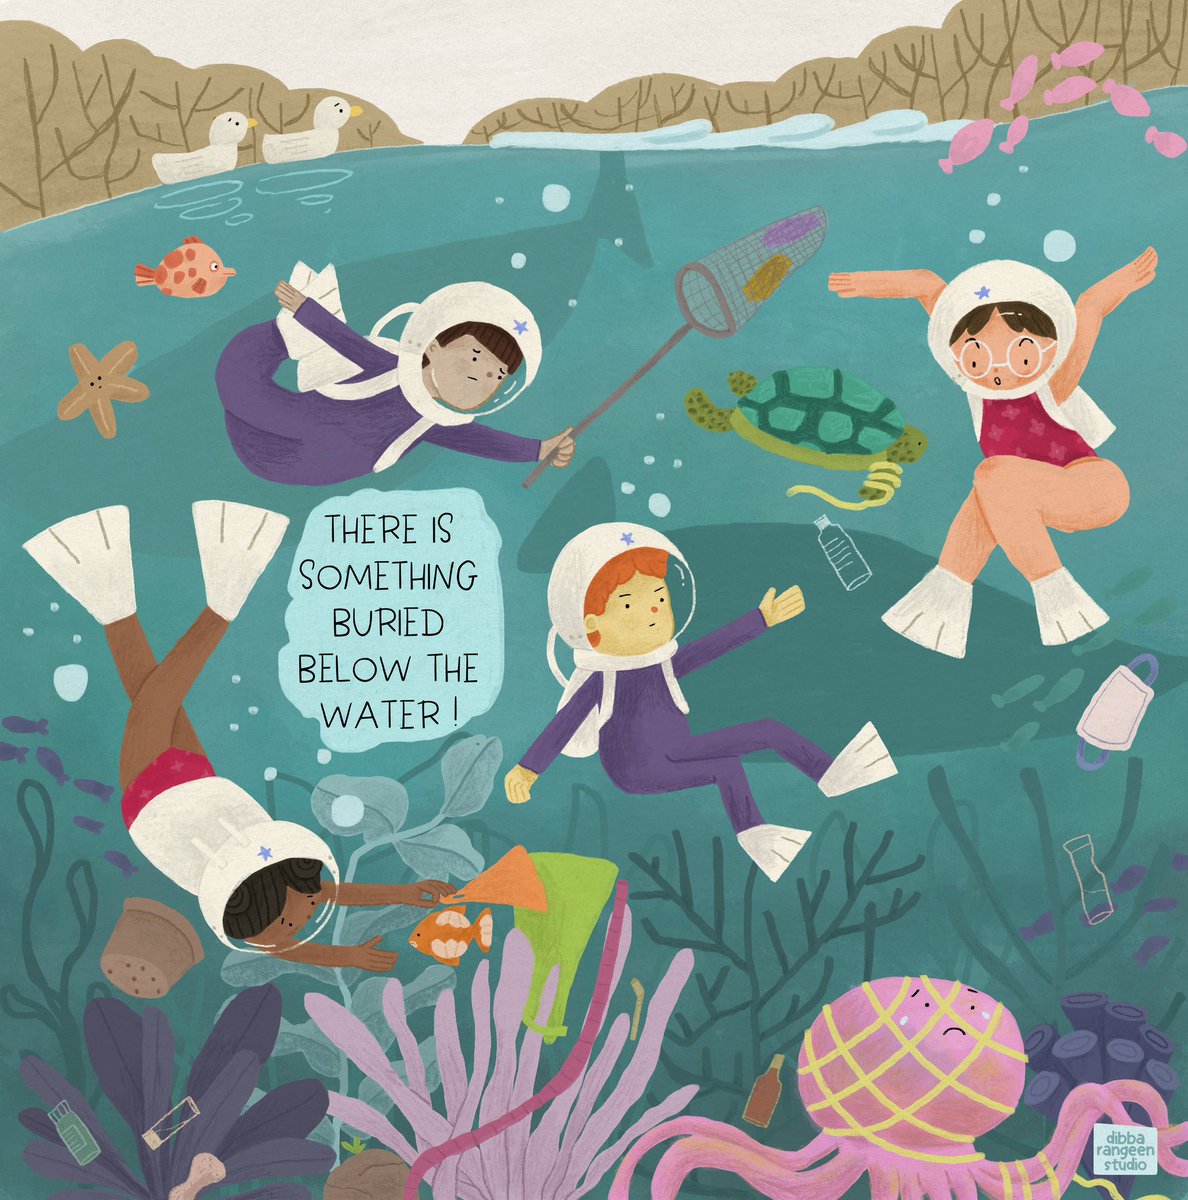 A group of kids from 'Star Rescue' take it upon themselves to clean the ocean near their home and to save the creatures stuck there! 
They are such an inspiration. If kids can, why can't we?

'Below the Water' for @ourplanetweek 
#ourplanetweek #kidlitart #childrensbooks